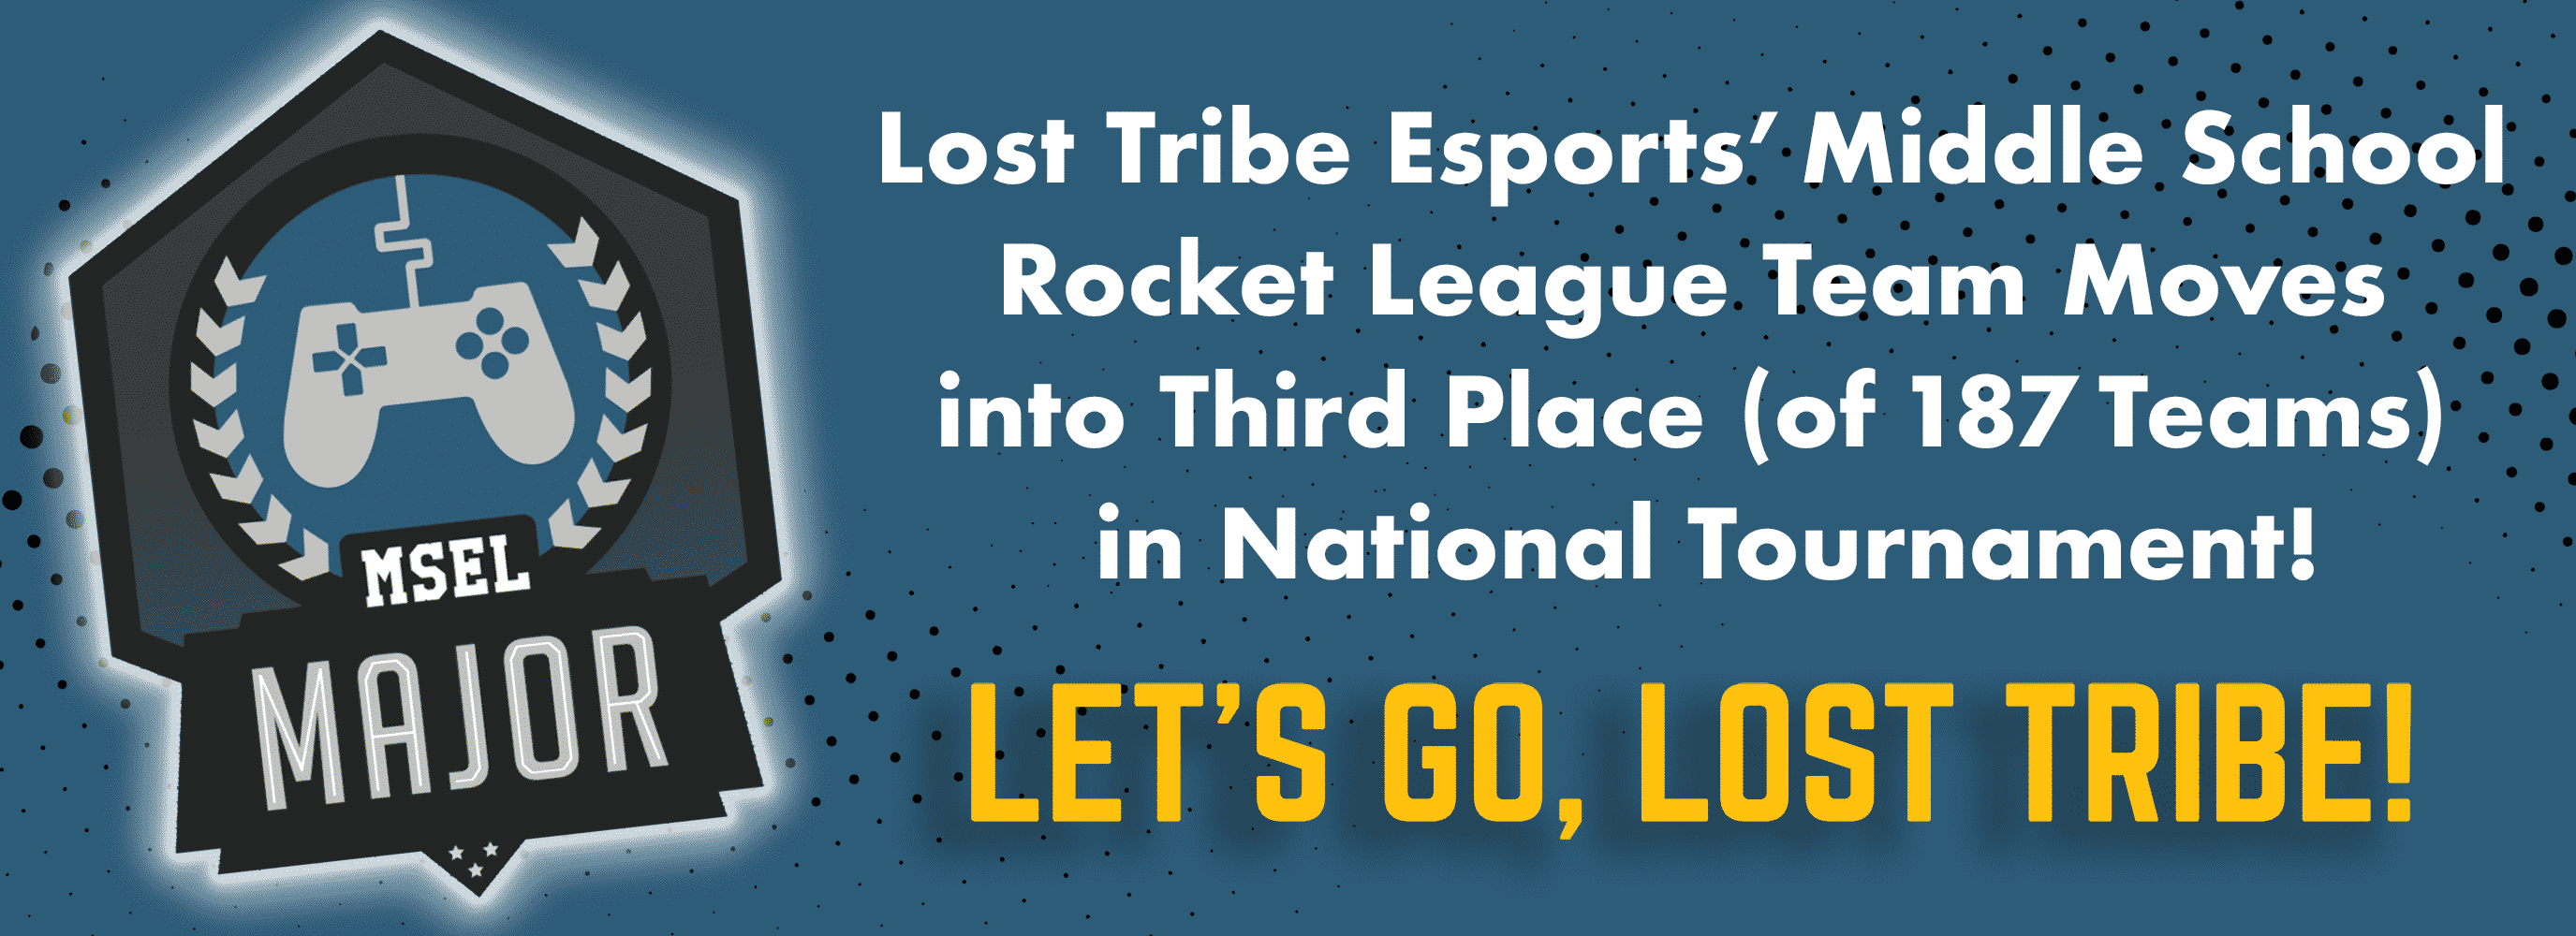 Lost Tribe Esports-Sponsored Team Moves Into Third Place in National Middle School League